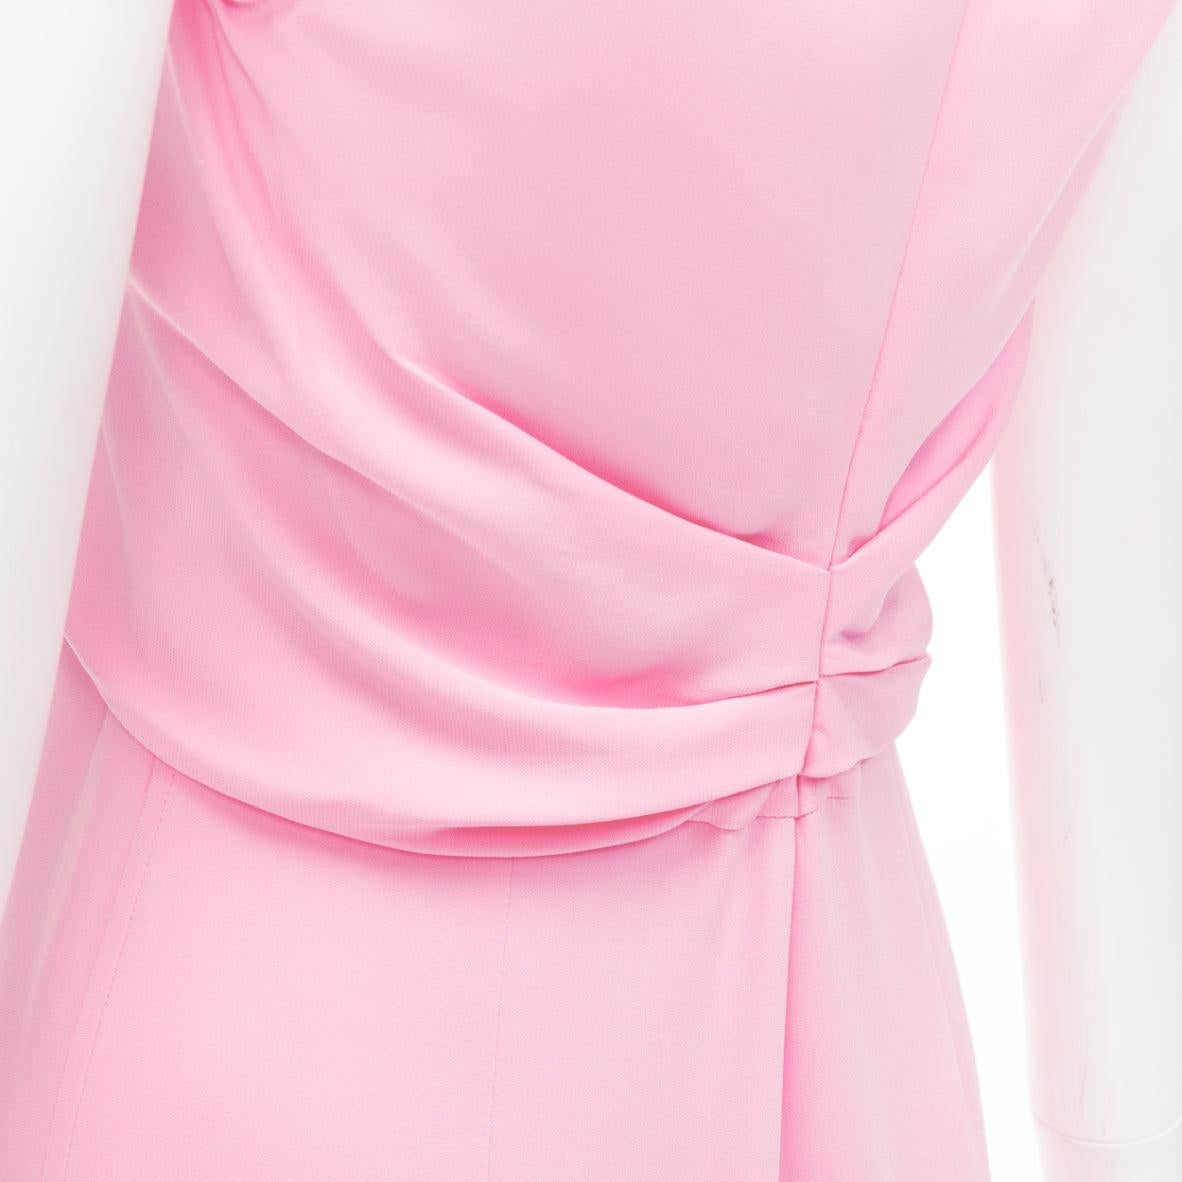 VICTORIA BECKHAM pink silky drape front ruched back sleeveless shift dress
Reference: MAFK/A00009
Brand: Victoria Beckham
Designer: Victoria Beckham
Material: Fabric
Color: Pink
Pattern: Solid
Closure: Zip
Extra Details: Back zip with ruched sides